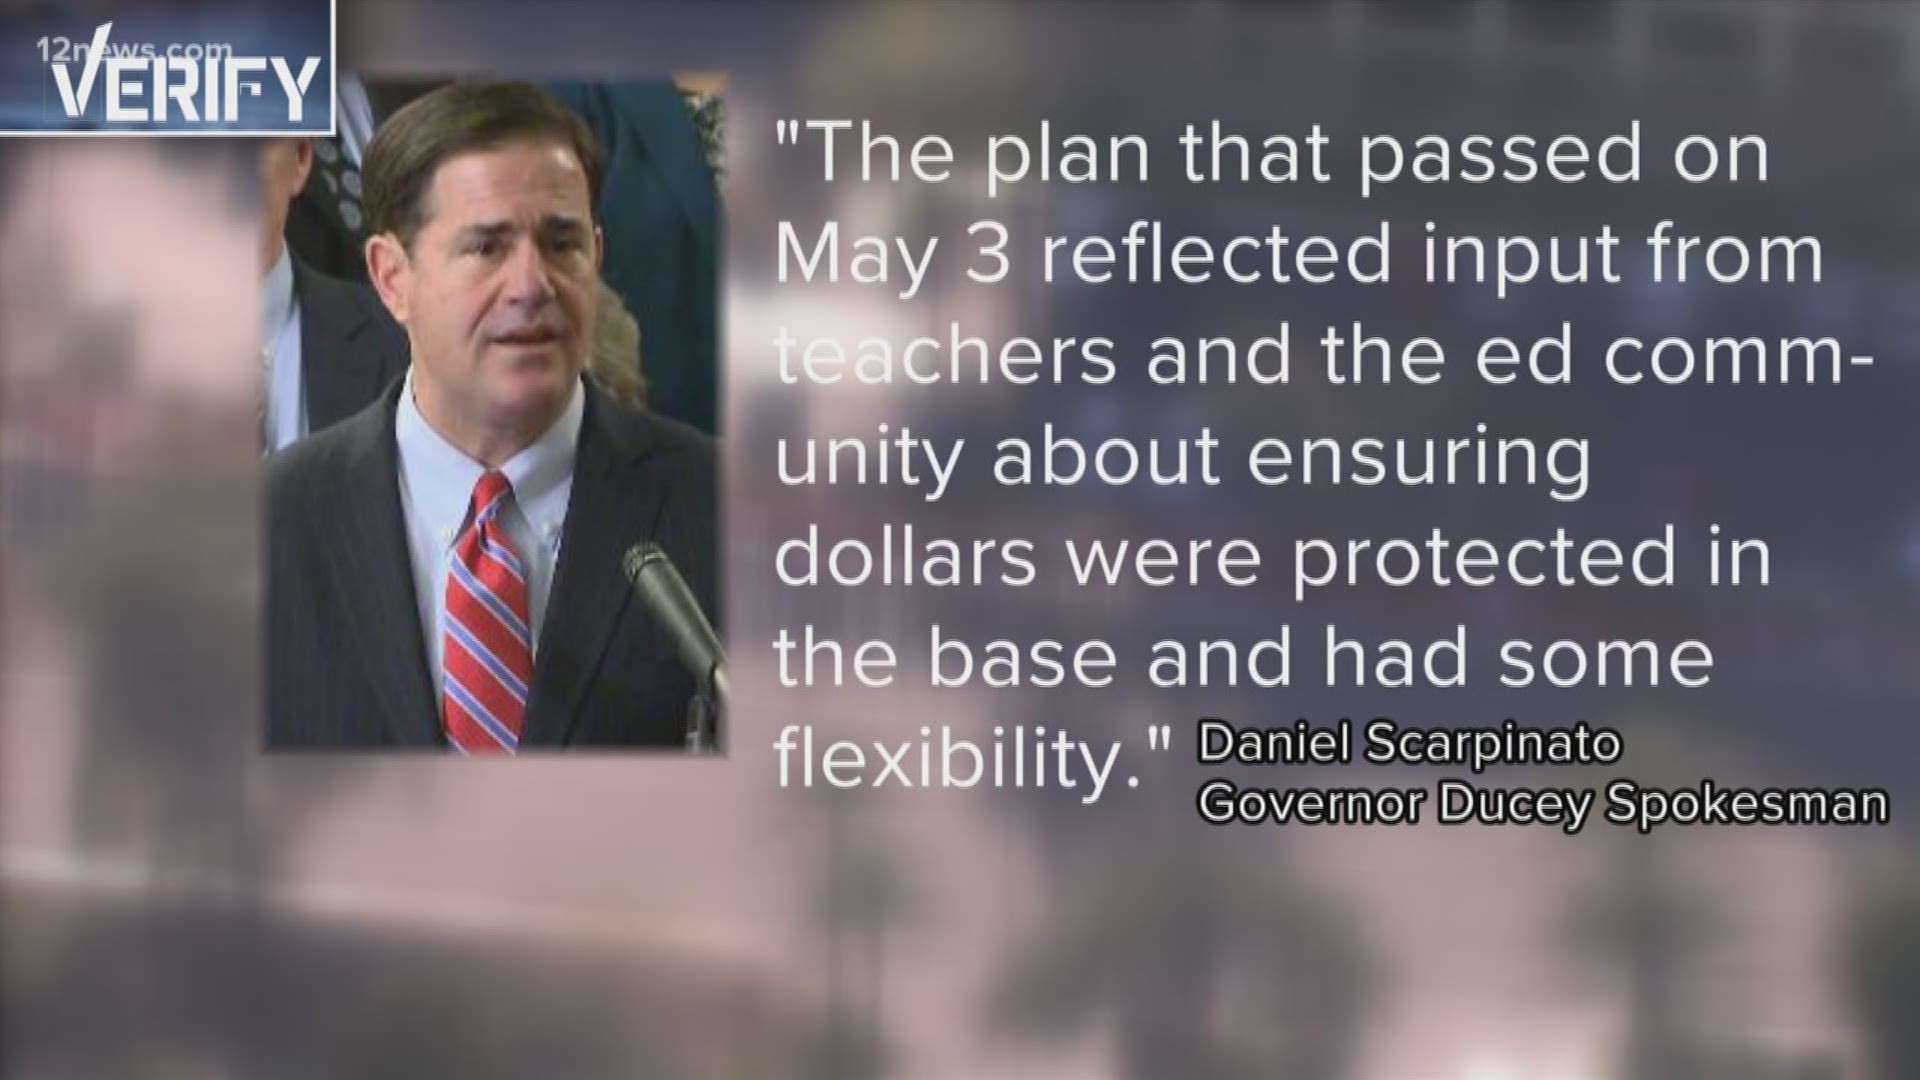 Gov. Ducey doesn't control how school districts spend their budgets. Are teachers really getting 20 percent raises by 2020?